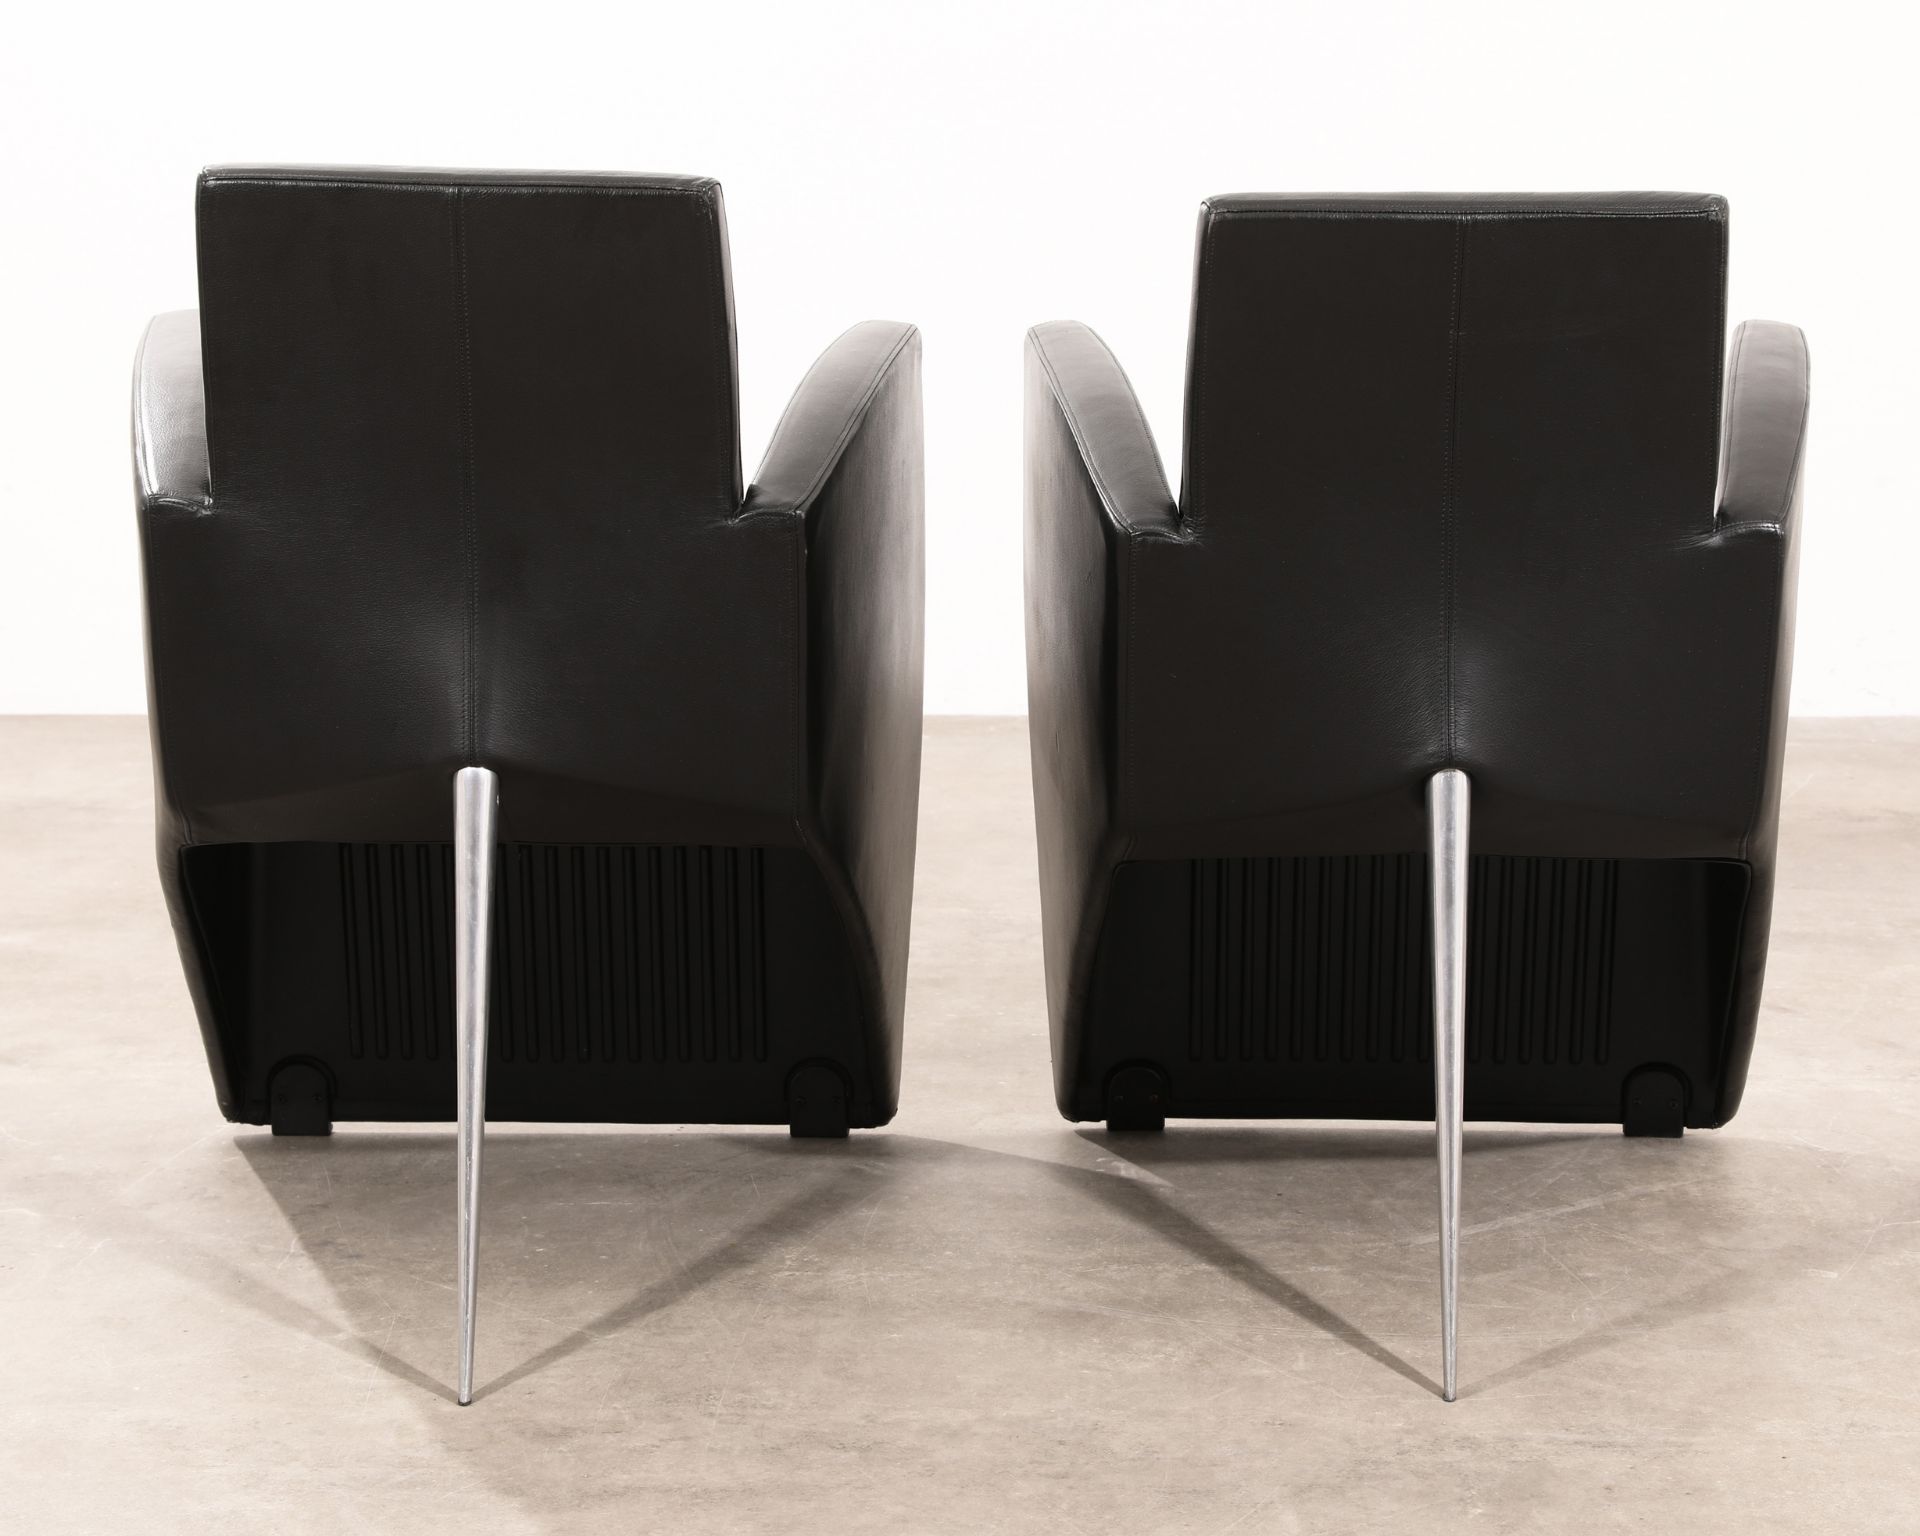 Philippe Starck, Aleph, 2 Chairs, model J. Lang - Image 4 of 5